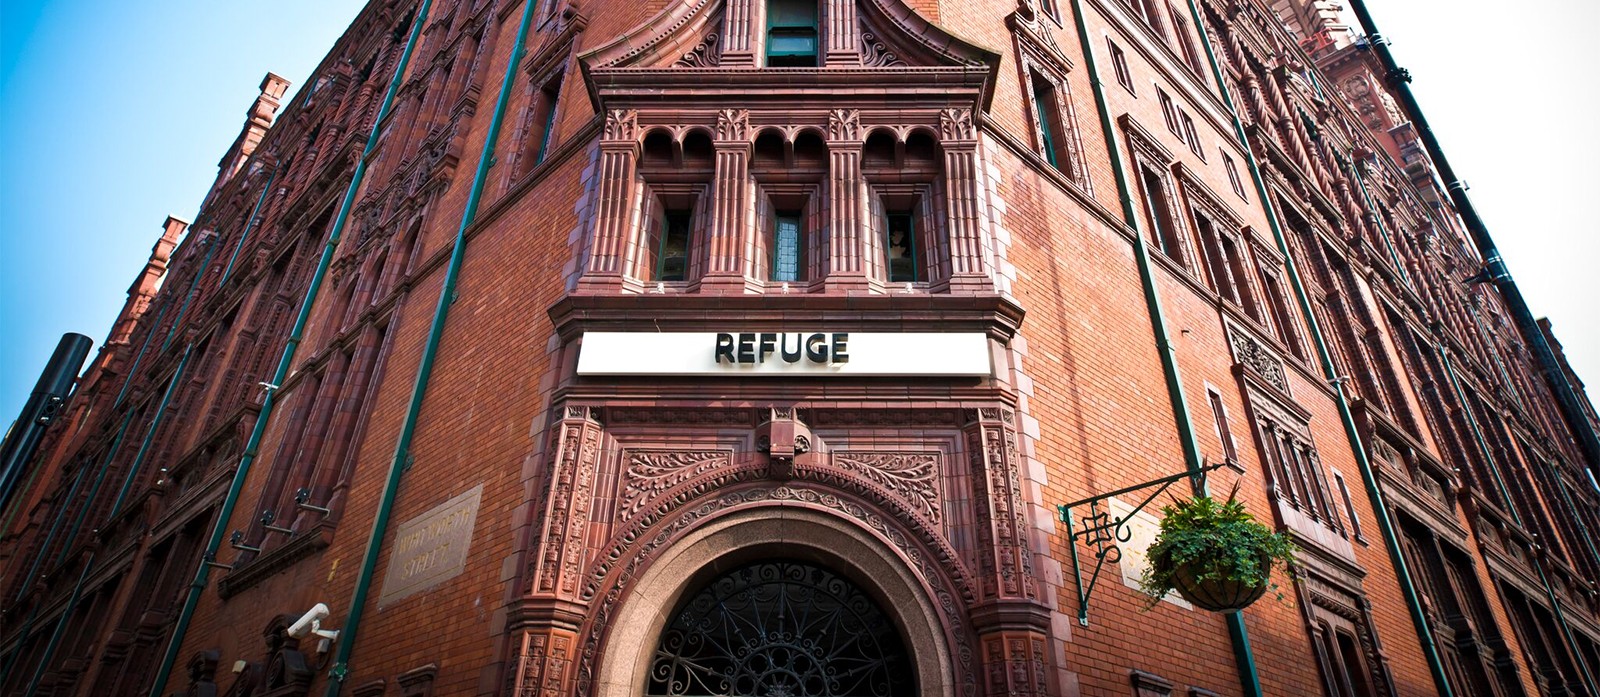 The Refuge by Volta